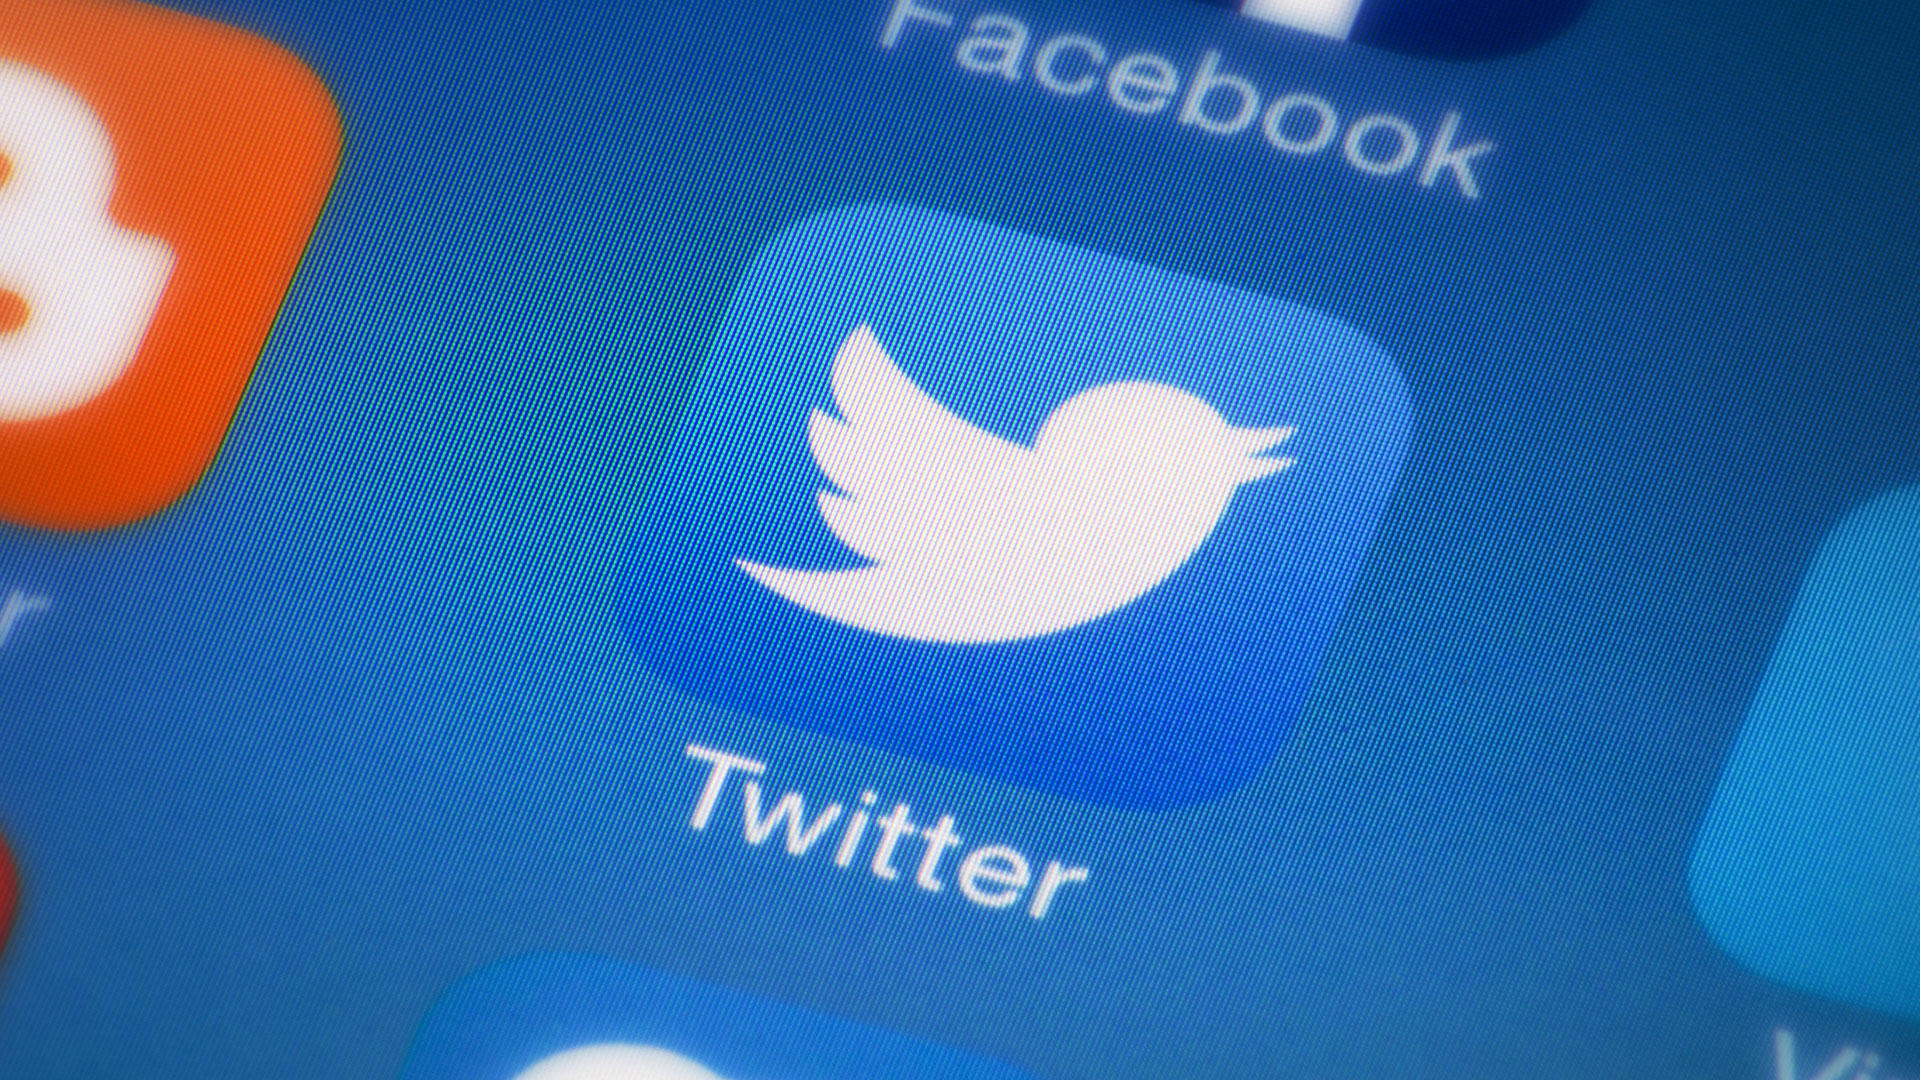 Twitter ad sales hit by coronavirus but active users soar